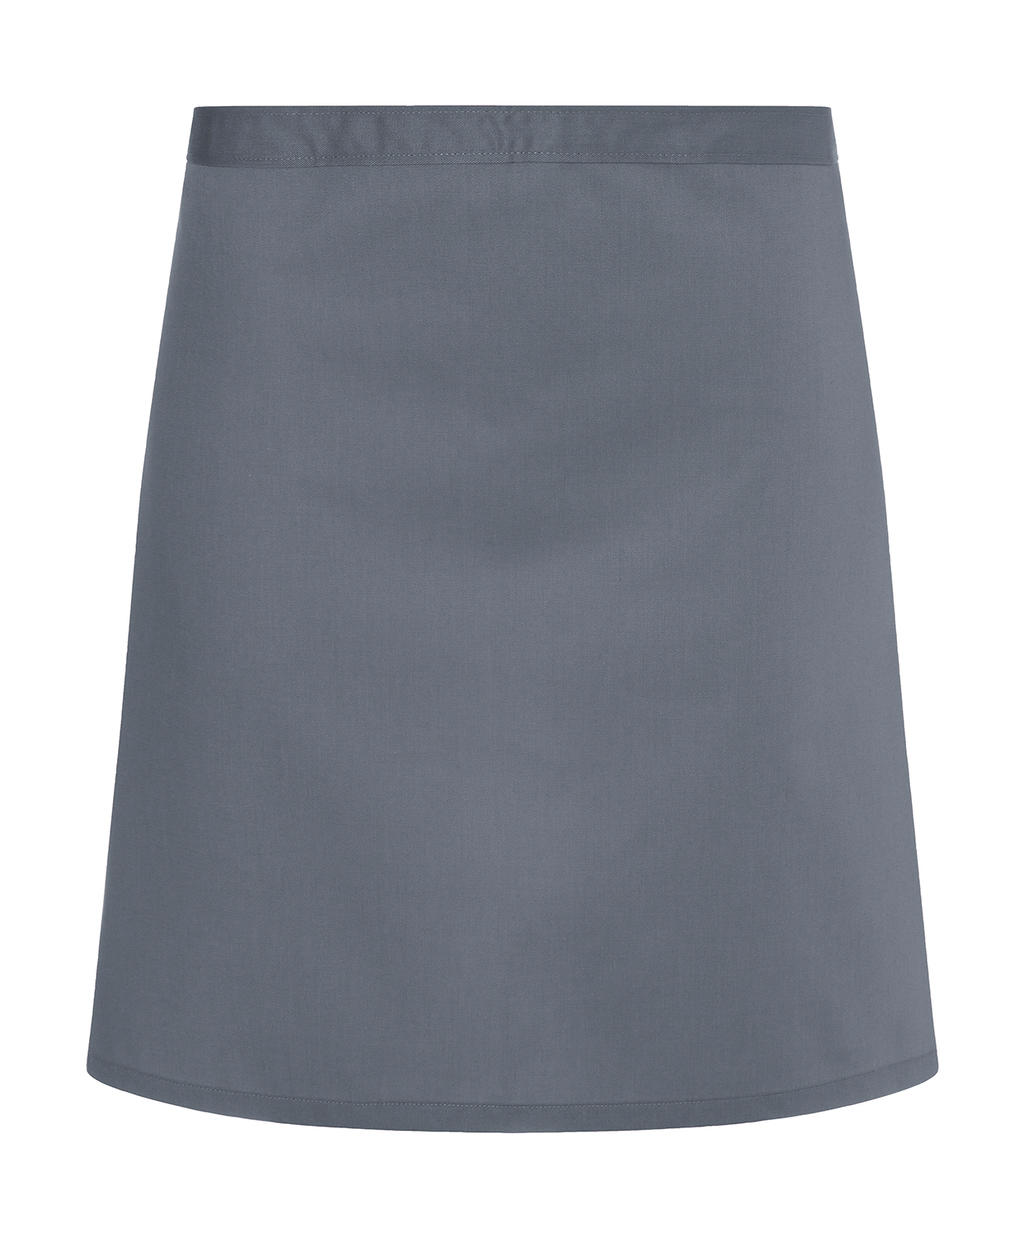  Waist Apron Basic 70 x 55 cm in Farbe Anthracite